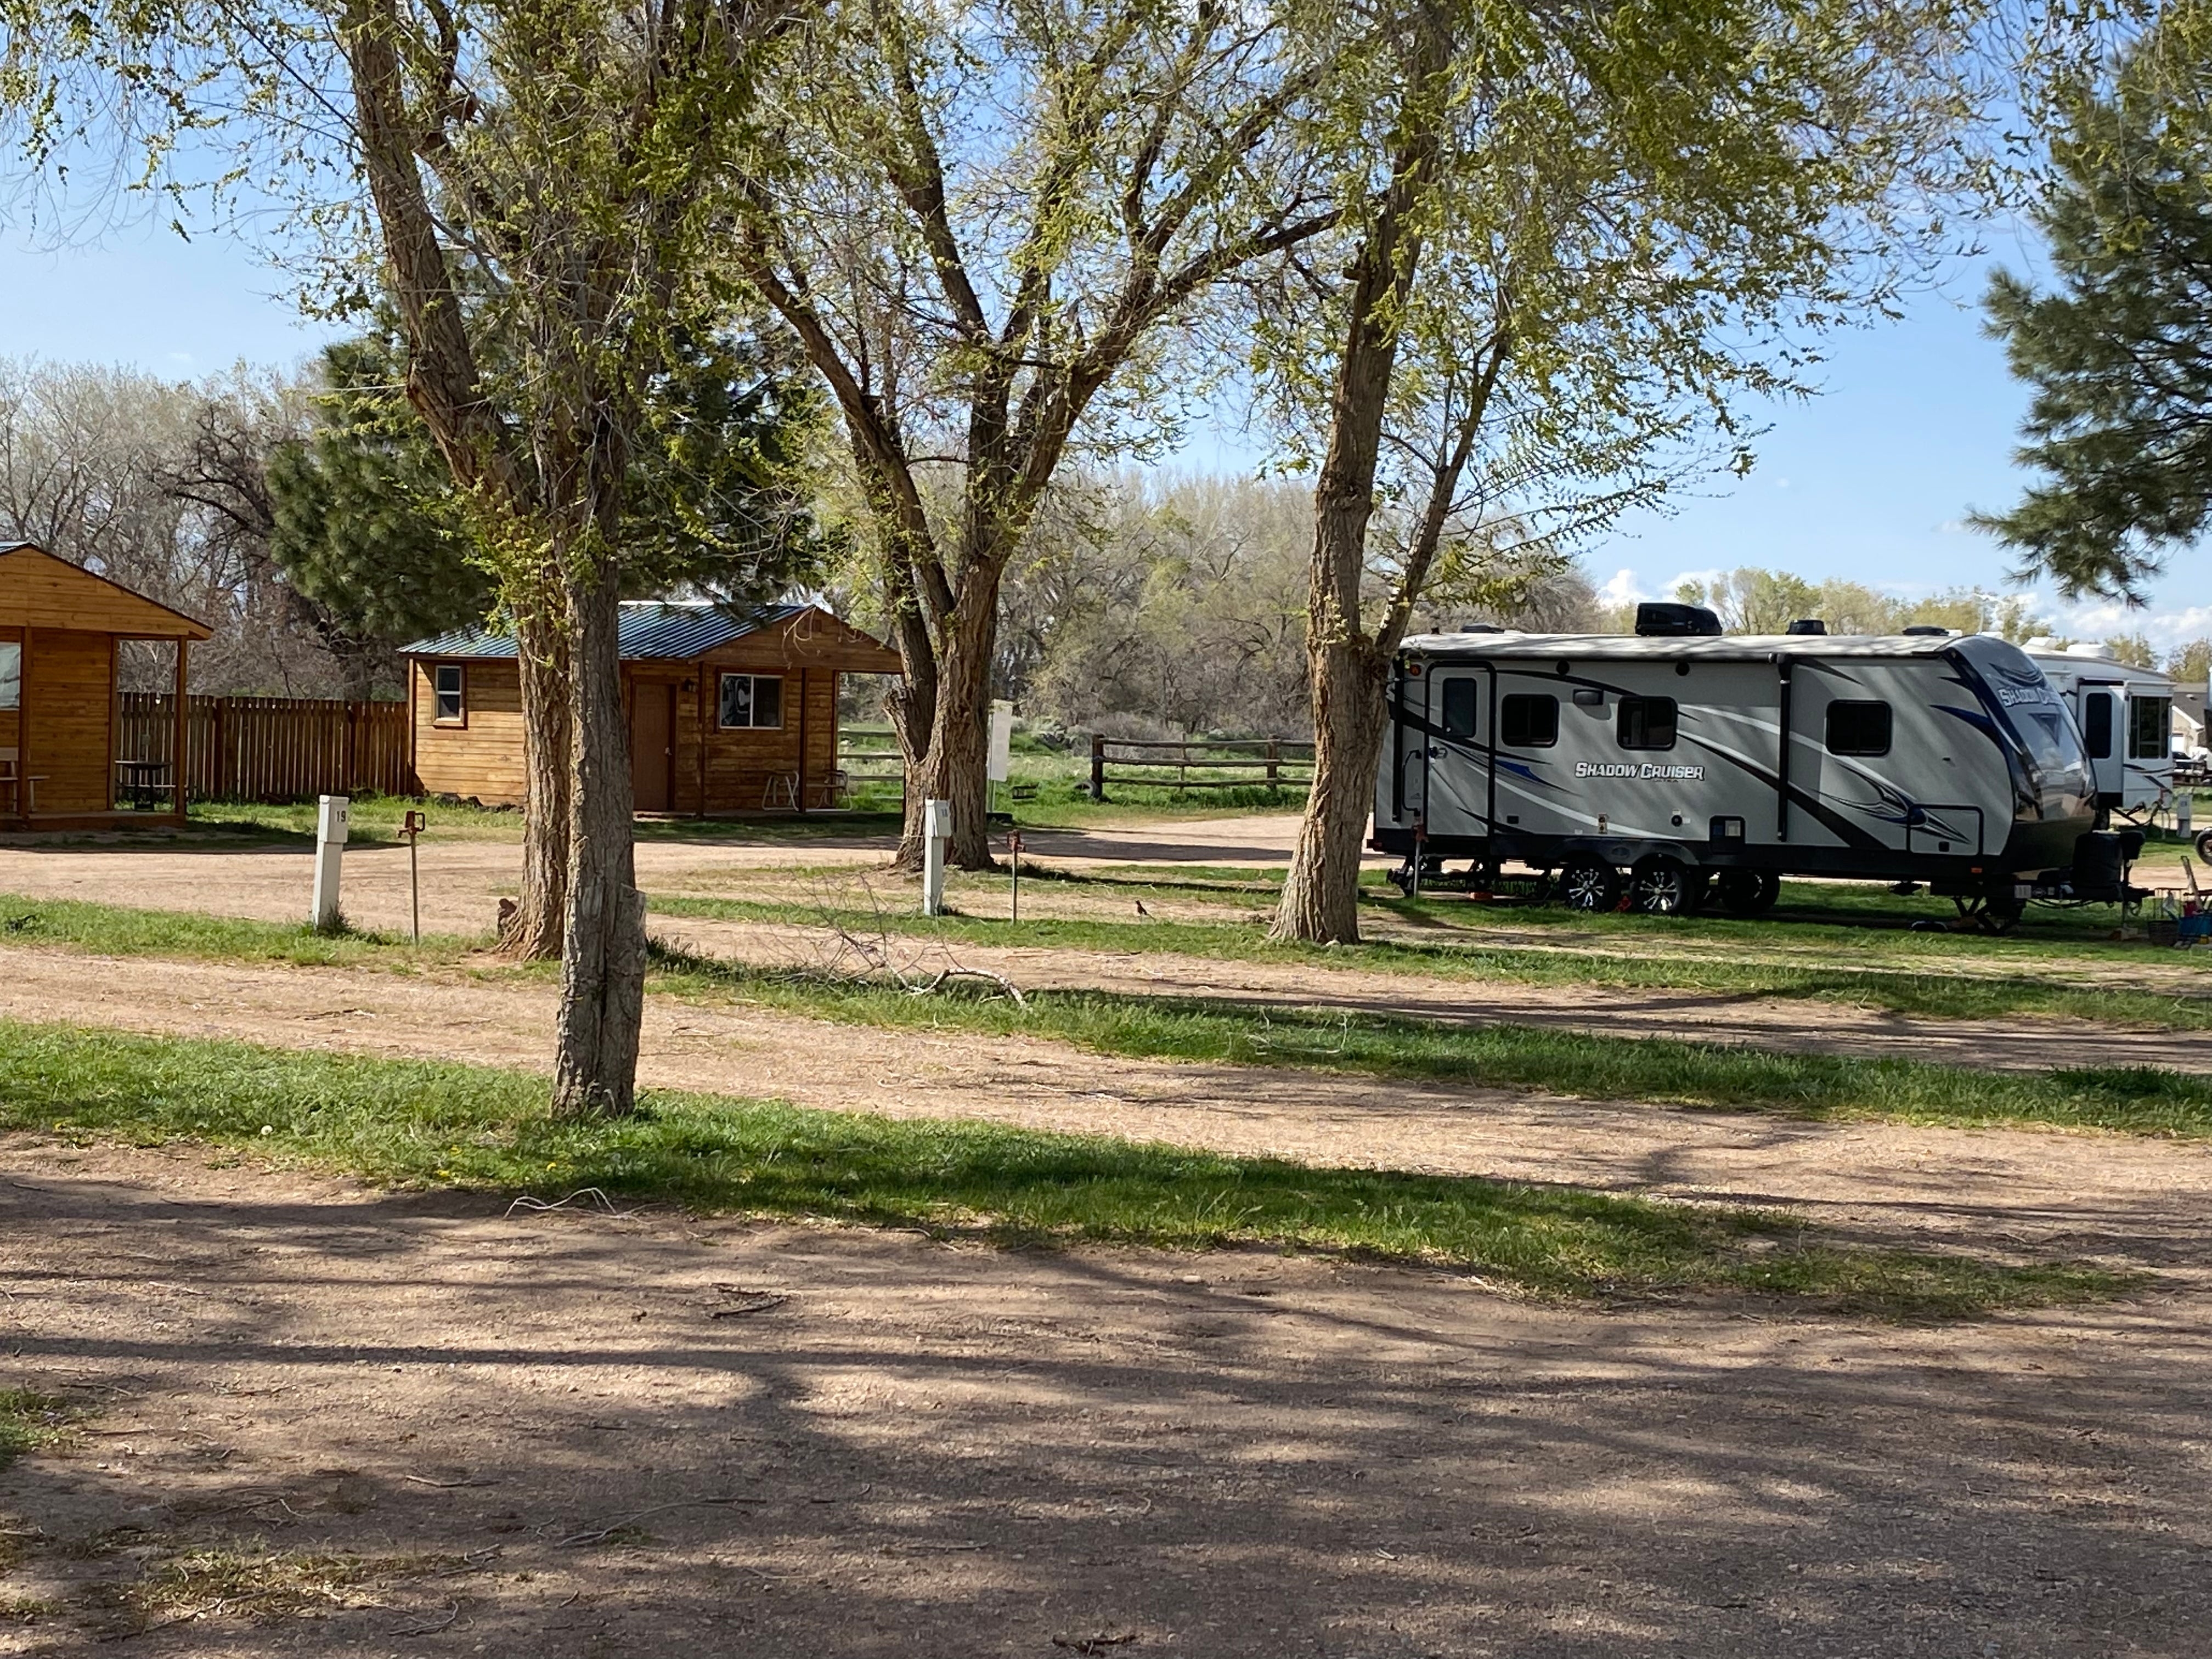 Camper submitted image from Wagons West RV Campground - 1